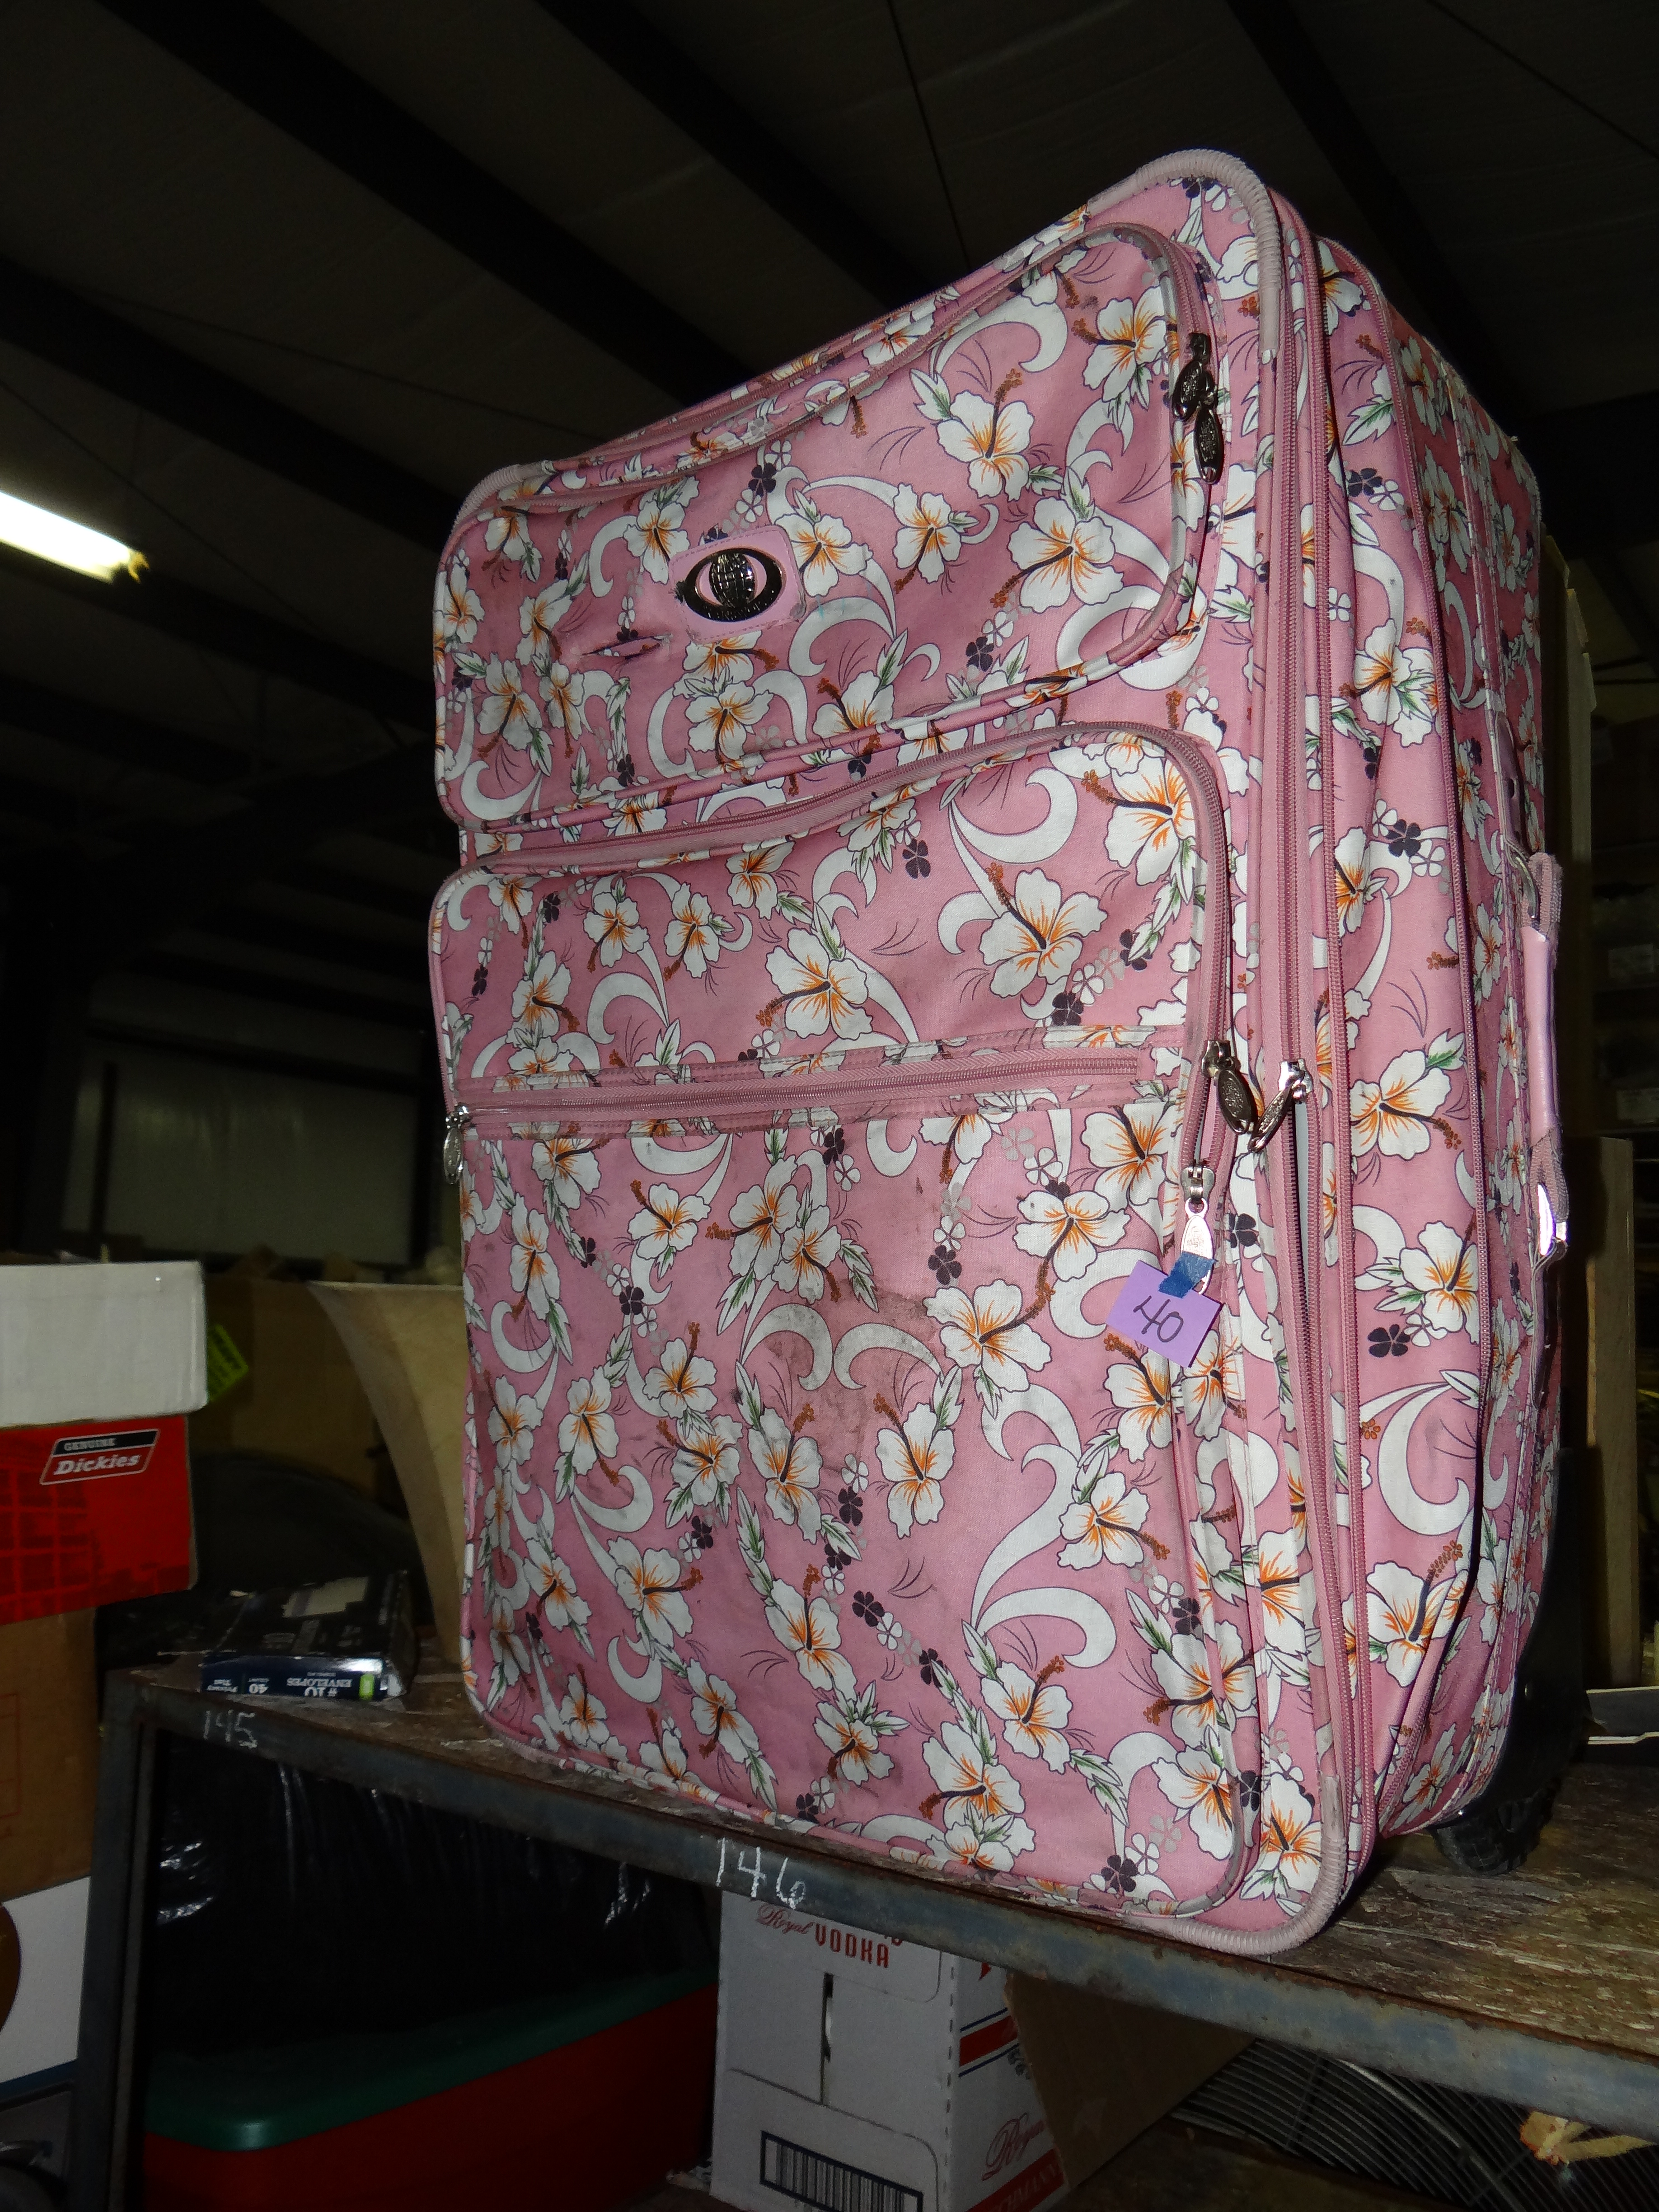 40-EXTRA LARGE Pink w/ Hibiscus Flowers Suitcase w/ Wheels & Extendable Handle